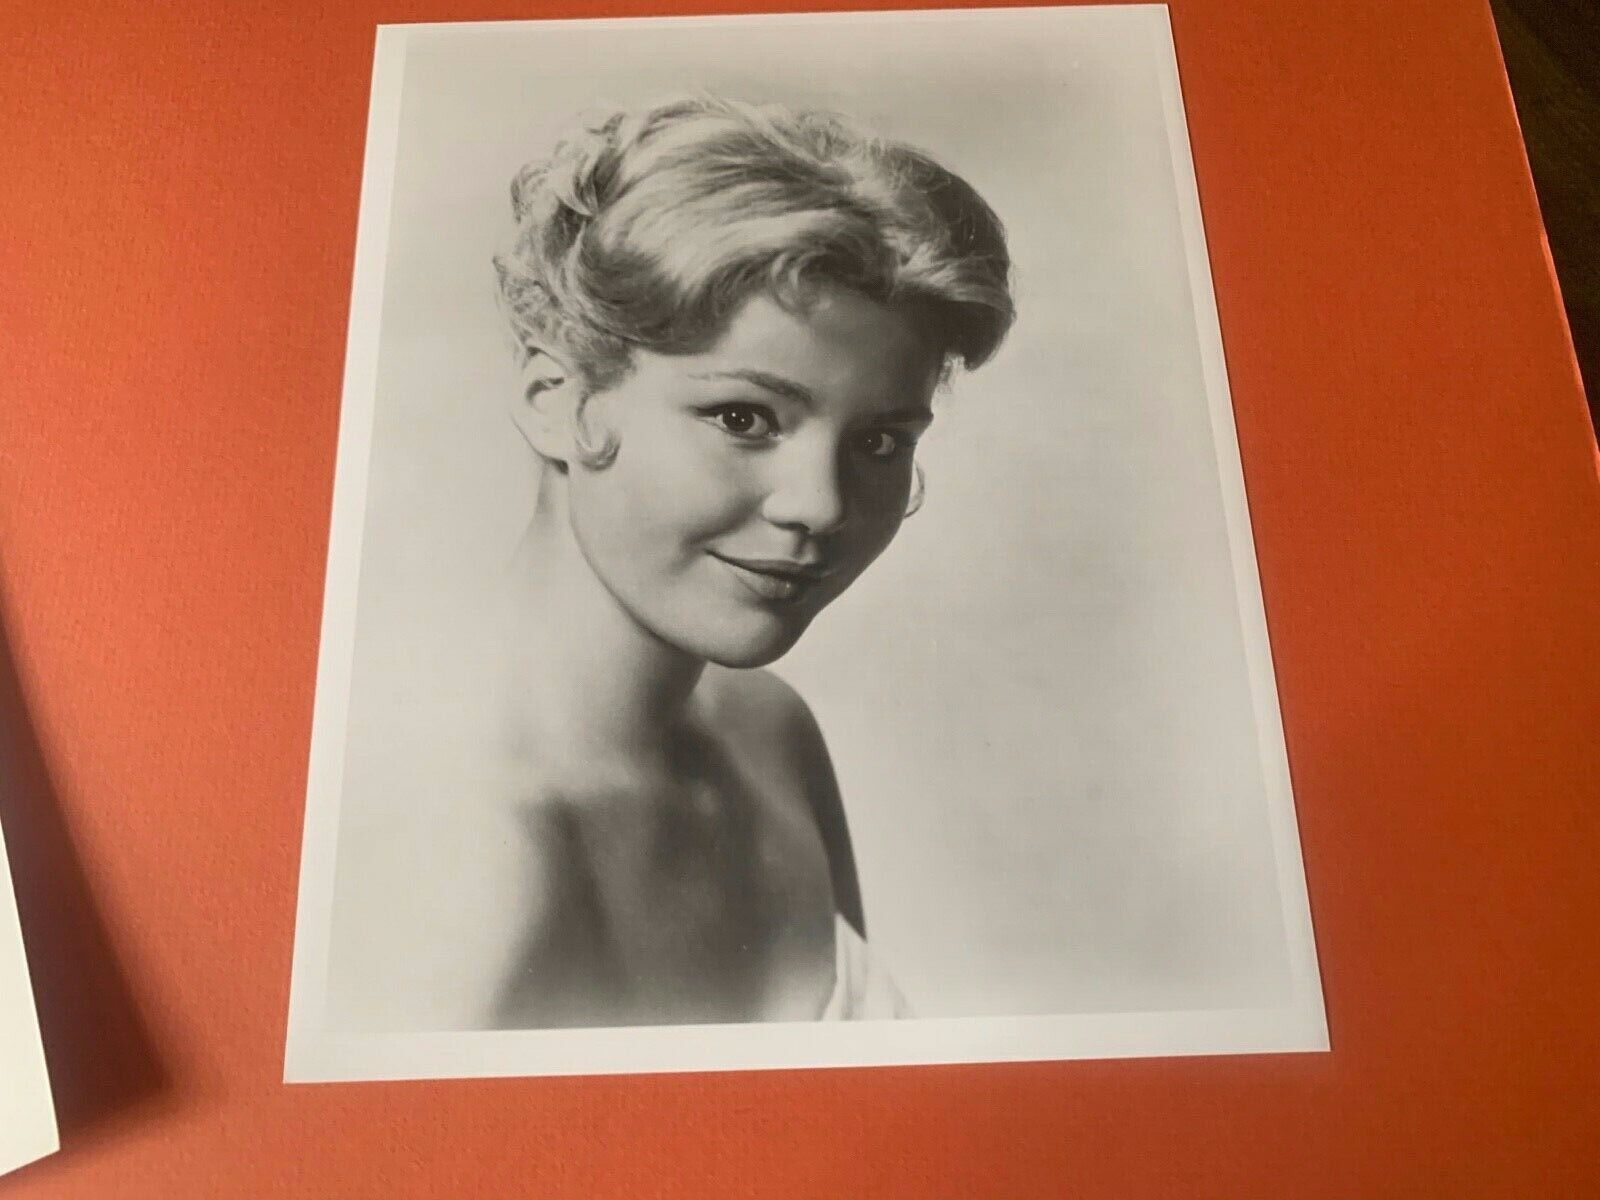 Tuesday Weld Actress Unsigned Vintage Publicity Photo Size 8x10 B&W Photo B